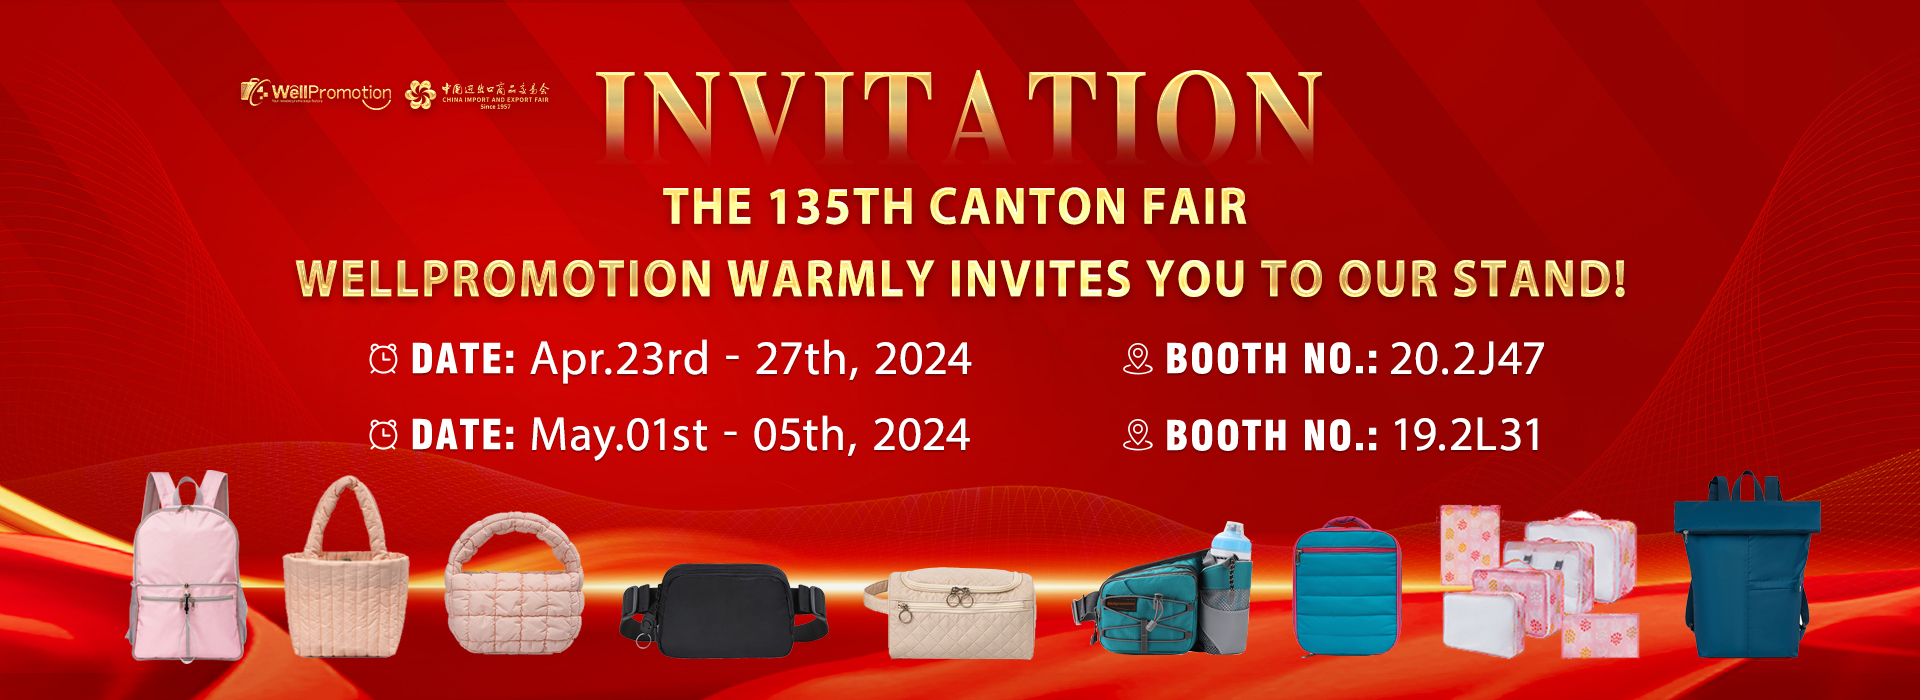 The 135th Canton Fair — Invitation from Wellpromotion